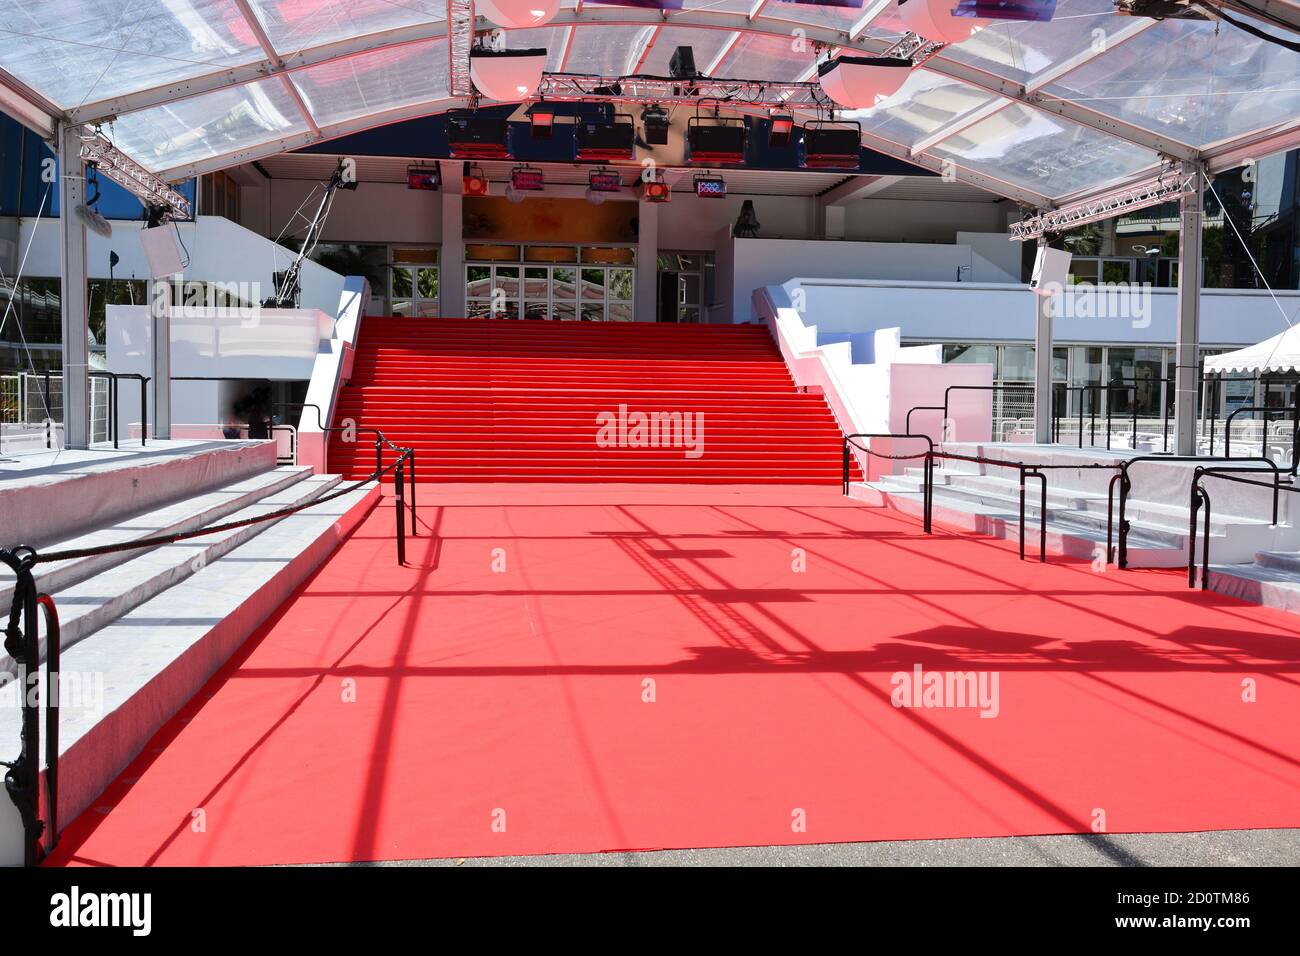 France, french riviera, Cannes, the famous red carpet of the Festival Palace for the International Film Festival rewarded by the golden palm. Stock Photo